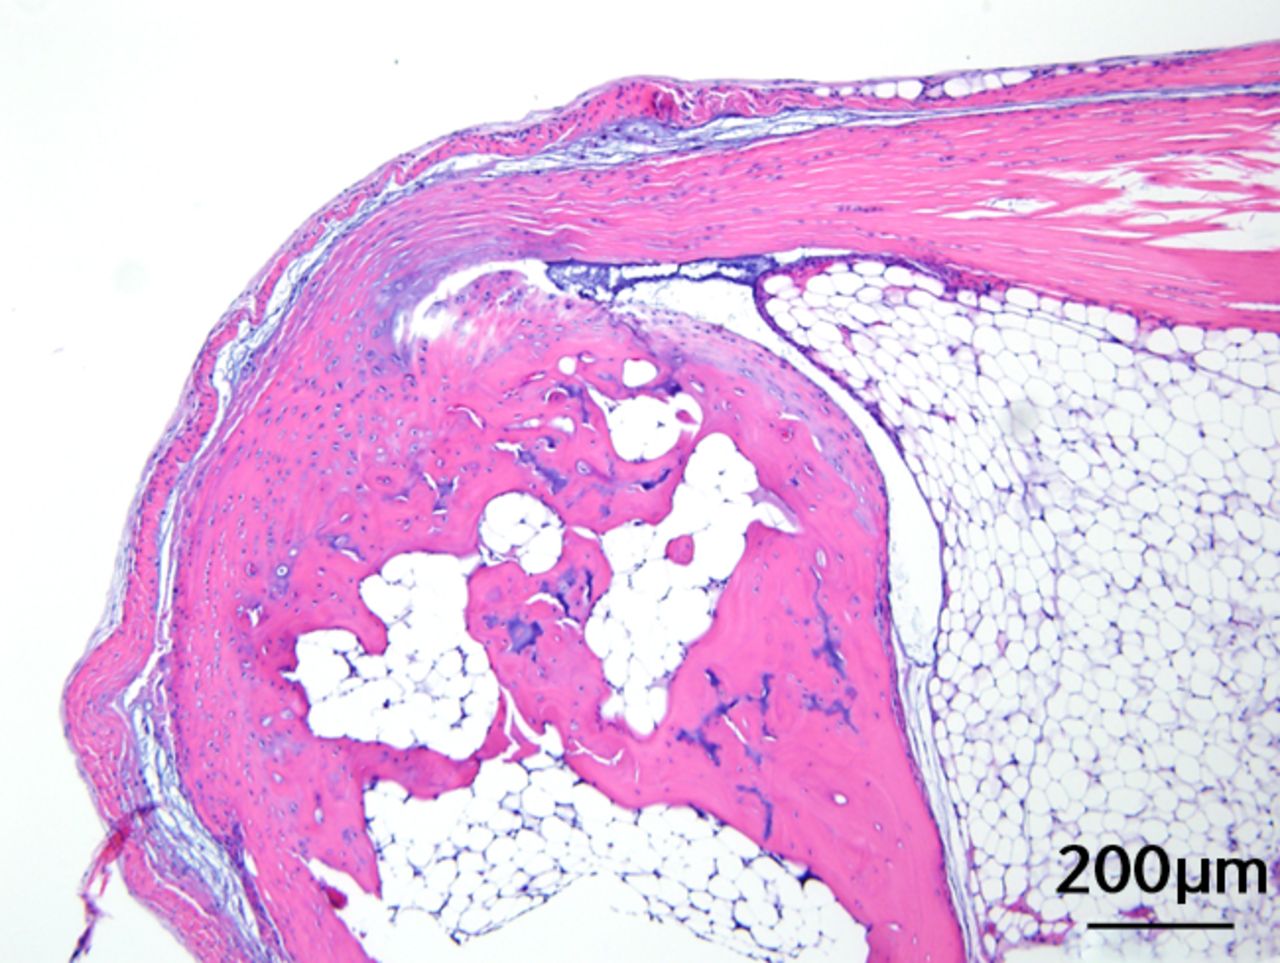 Figs. 3a - 3c 
            
              Figures 3a and 3b – histological
images of the Achilles tendon at insertion in a) a sedentary, control-diet
animal (neither high-fat diet (HFD) nor branched-chain amino acid
(BCAA)), and b) in an exercise (Ex), HFD and BCAA treated mouse
(both haematoxylin &
 eosin, bar 200 µm). Figure 3c – bar chart
showing the mean quadriceps muscle fibre diameter measured following
tissue collection. Groups not sharing a letter (‘a’ or ‘b’) are
significantly different, based on a significant main effect for
exercise and no other significant main effects or interactions.
Error bars indicate standard deviation.
          